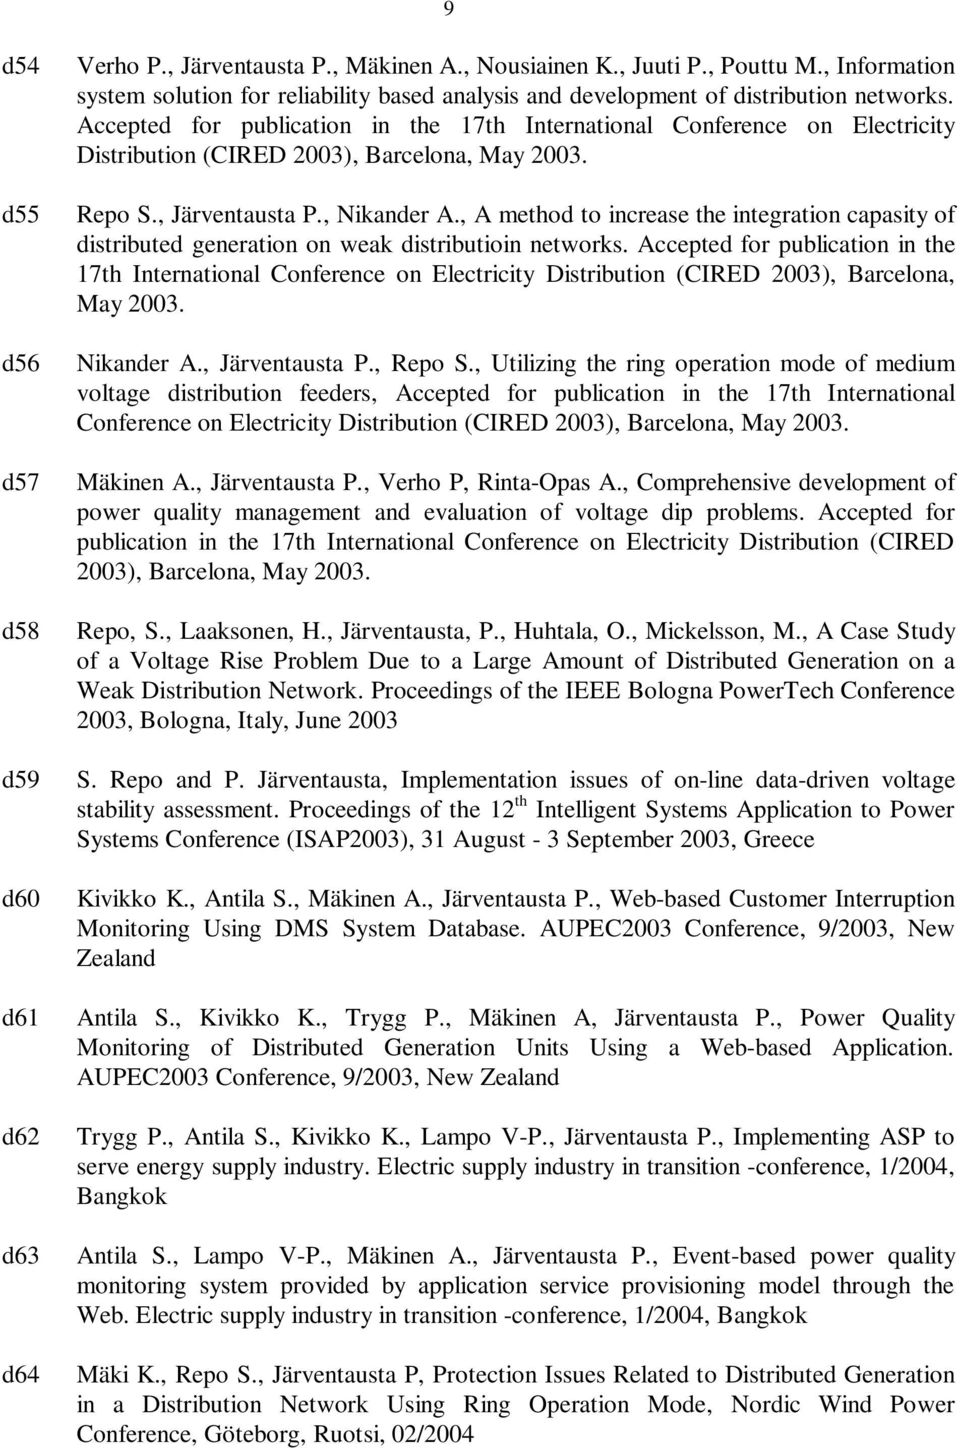 Accepted for publication in the 17th International Conference on Electricity Distribution (CIRED 2003), Barcelona, May 2003. Repo S., Järventausta P., Nikander A.